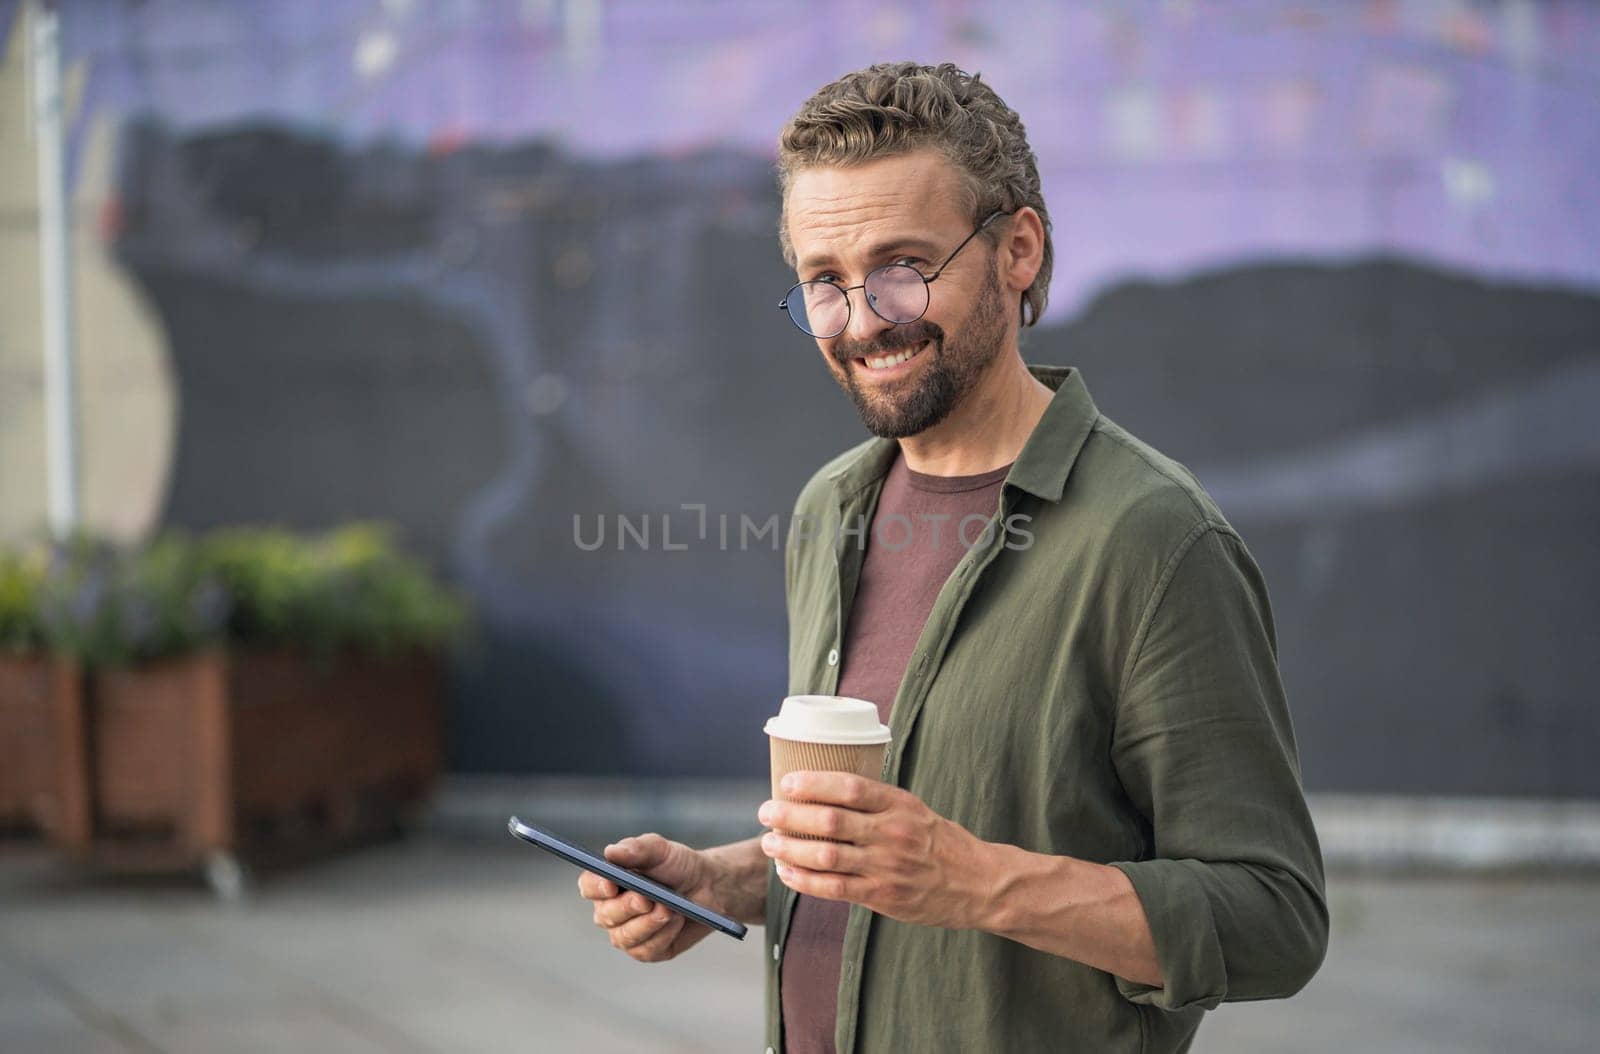 Sarcastic man typing a message on his phone while enjoying a cup of coffee outdoors. With a hint of irony and sarcasm in his expression, he combines technology and leisure in a playful manner. by LipikStockMedia